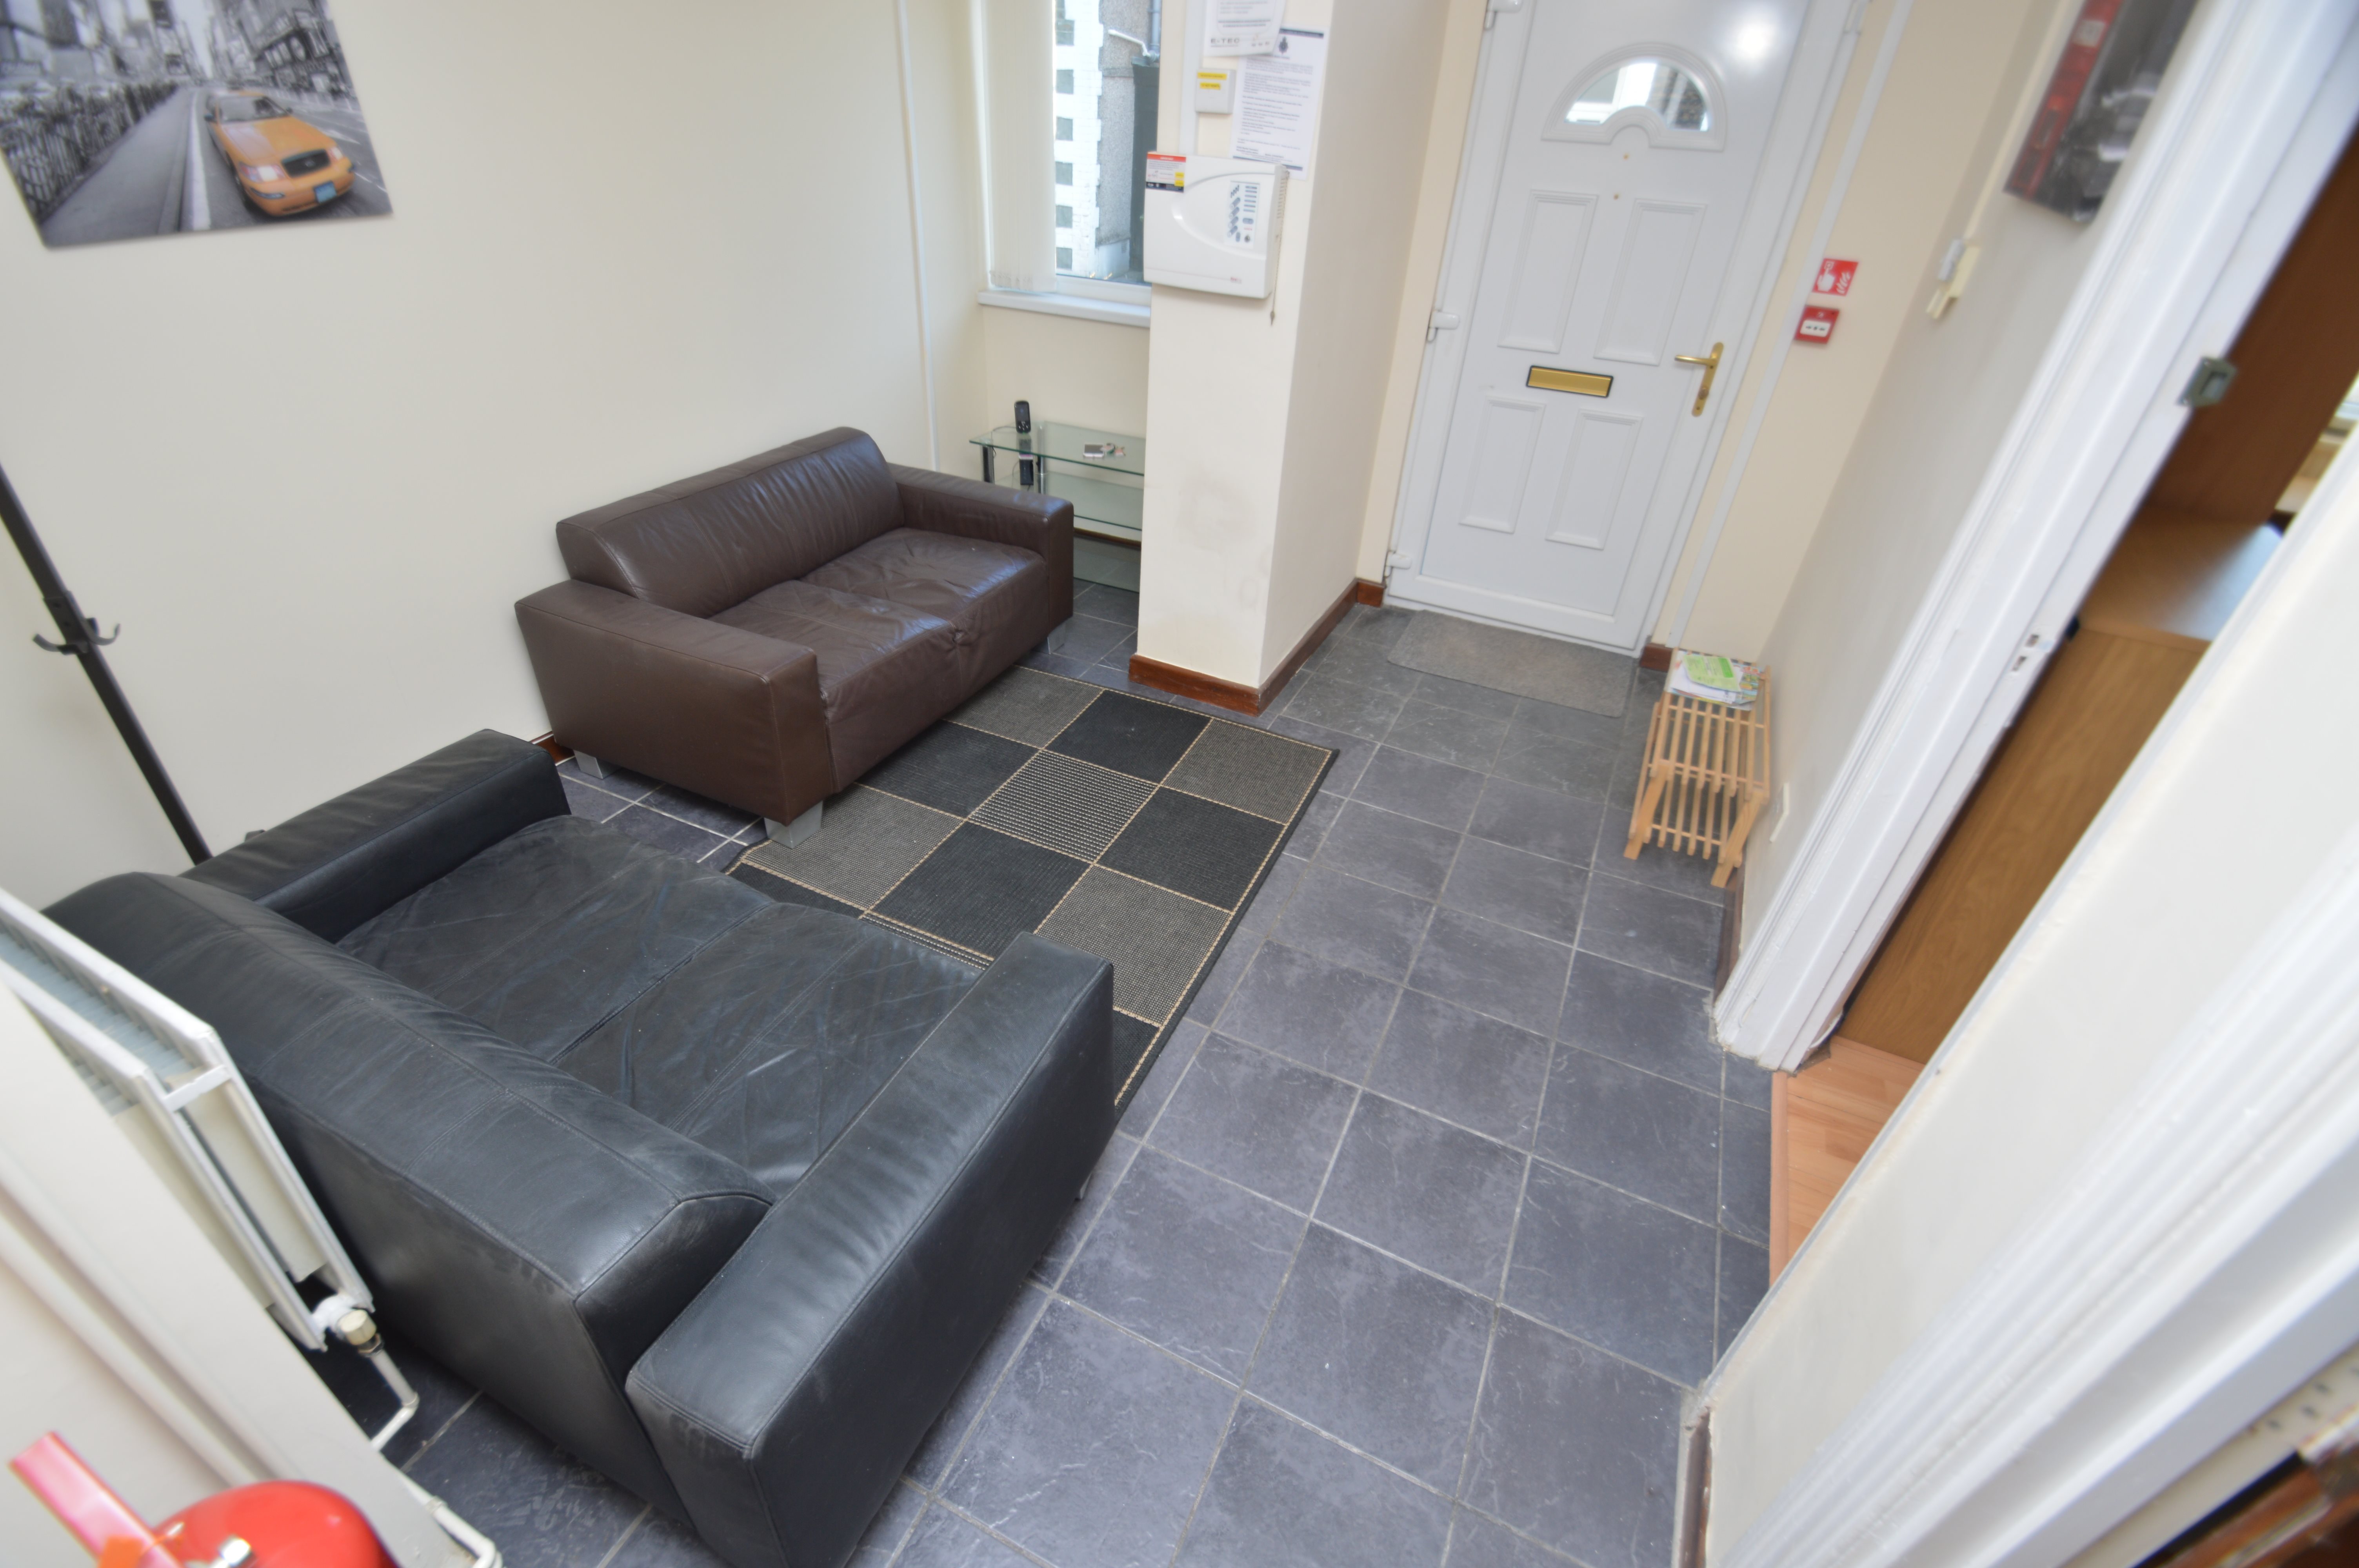 1 bed house / flat share to rent in Wood Road, Treforest 6